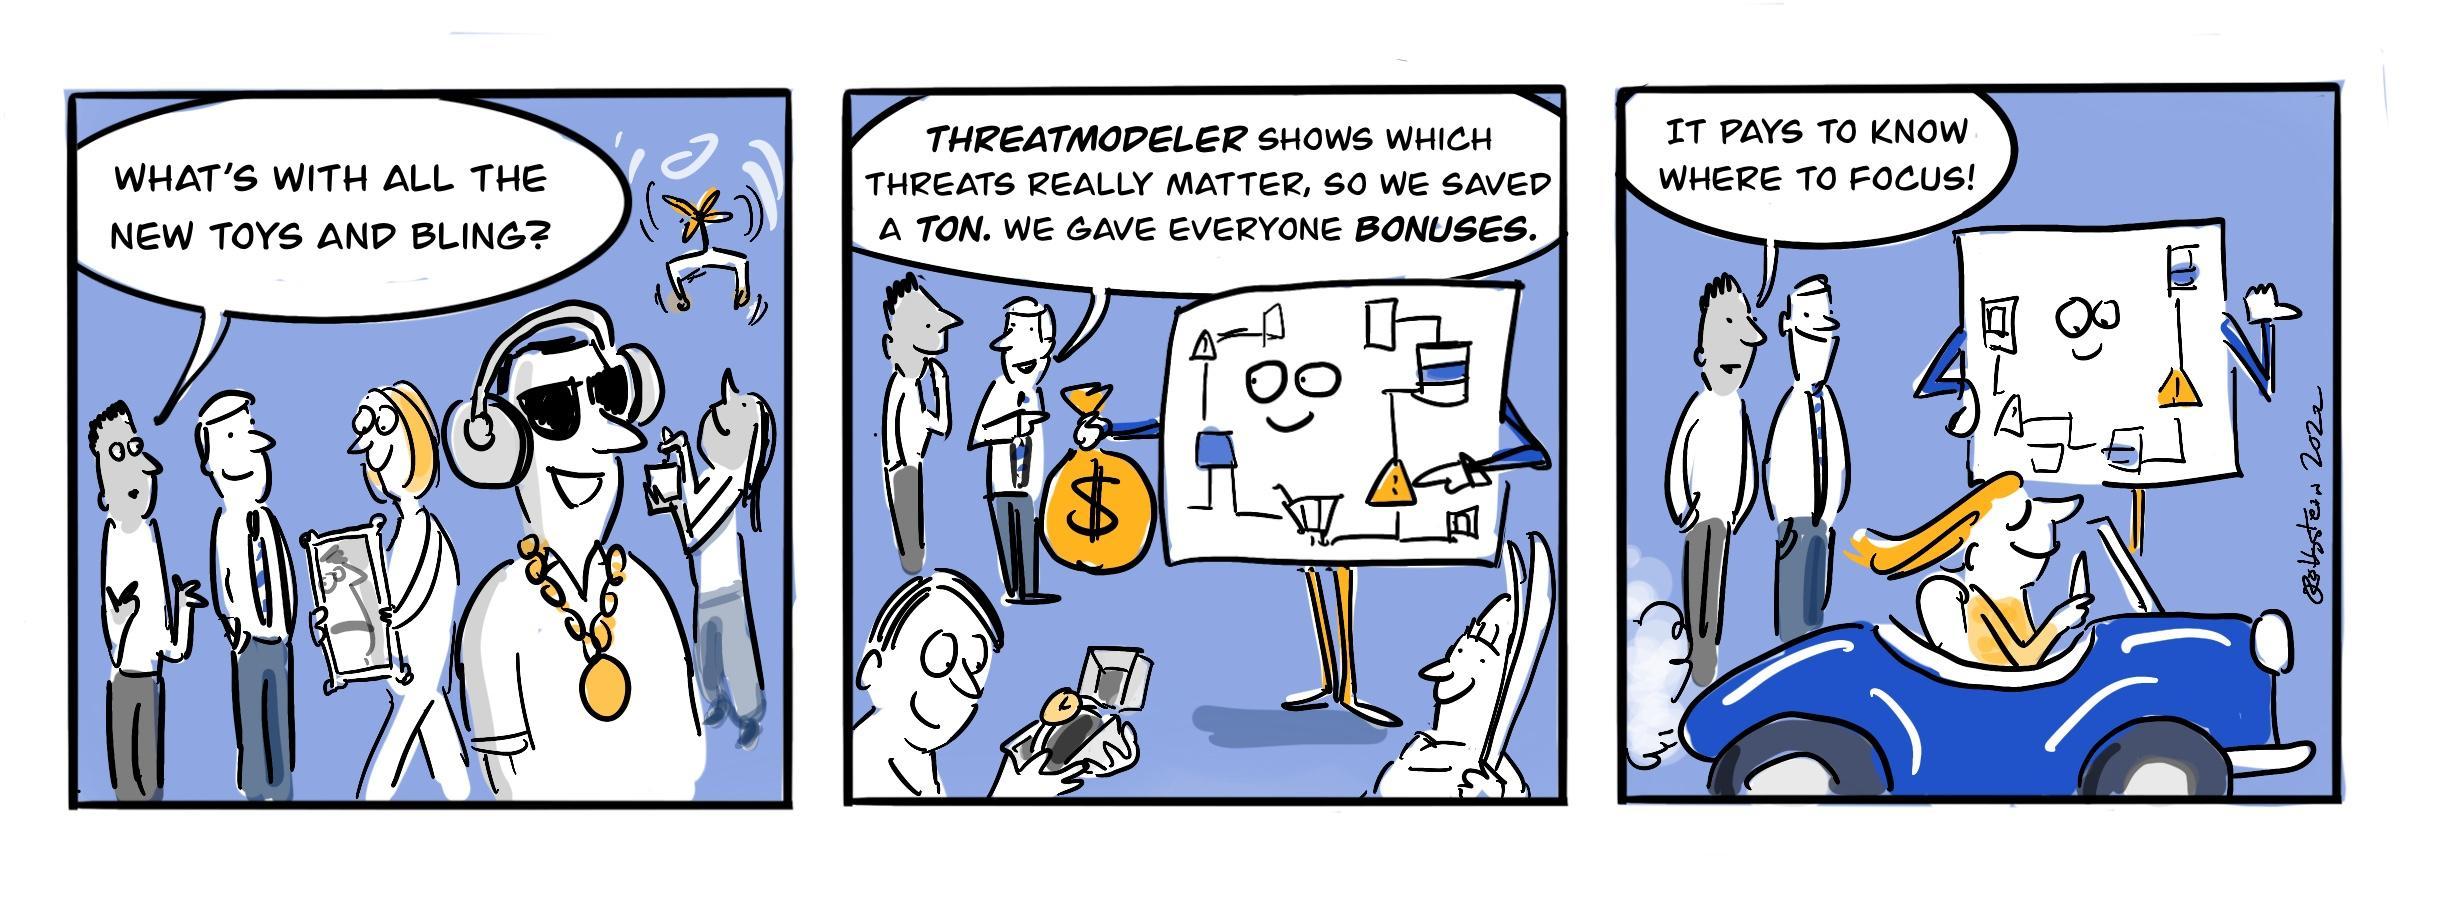 Three panel cartoon about paying to know where to focus